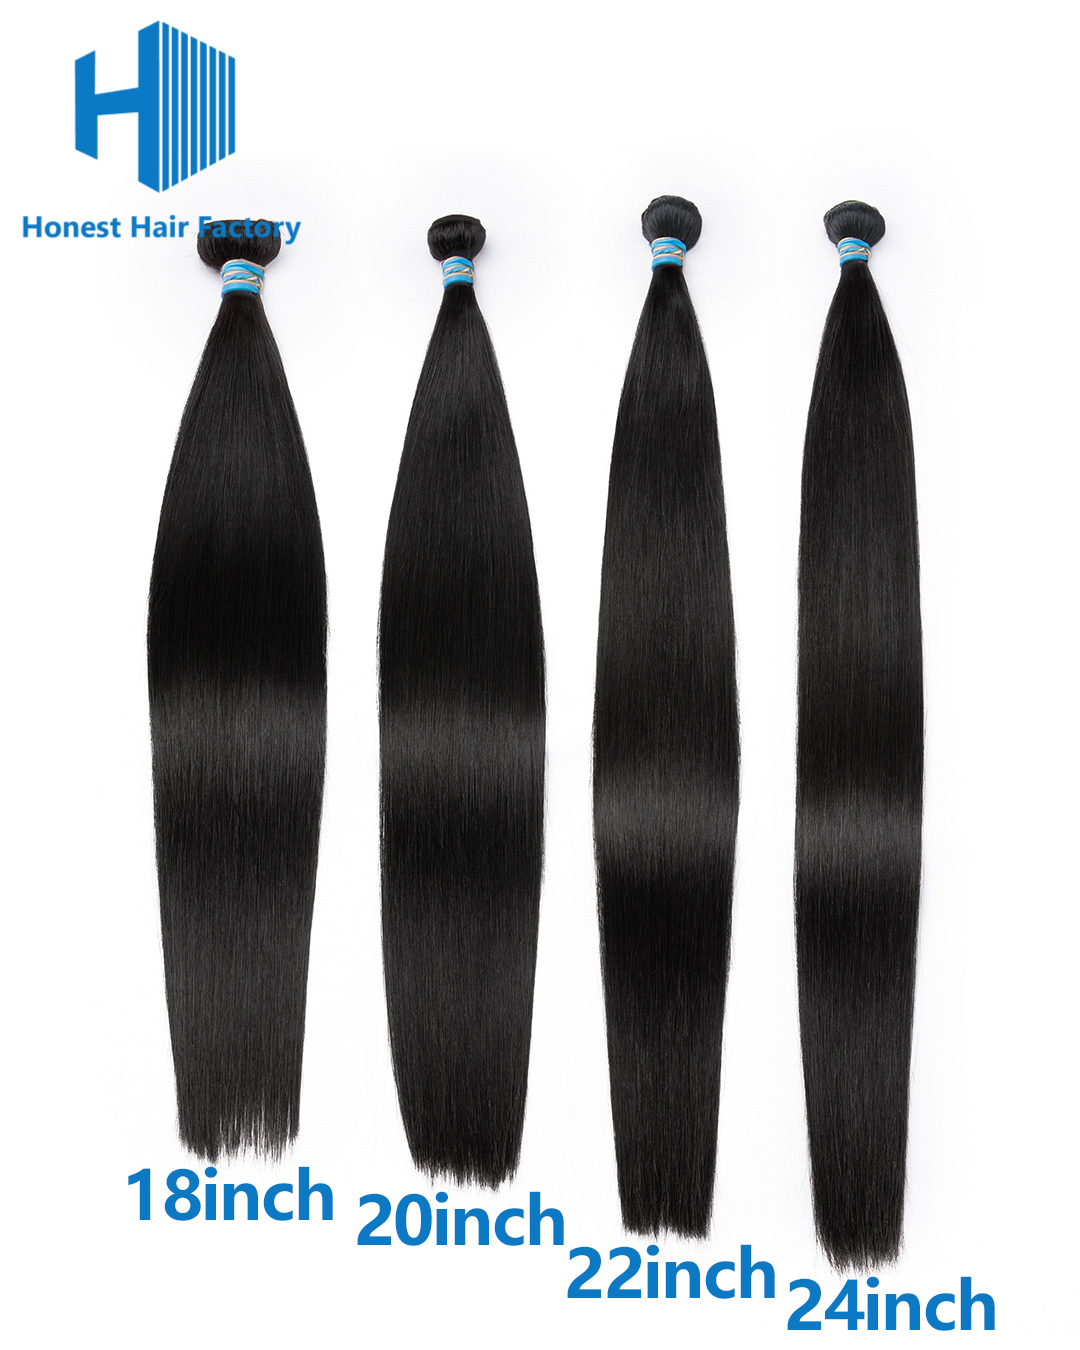 Limited Time! Free Shipping! Blue Band Hair Bundle Deals (Straight)